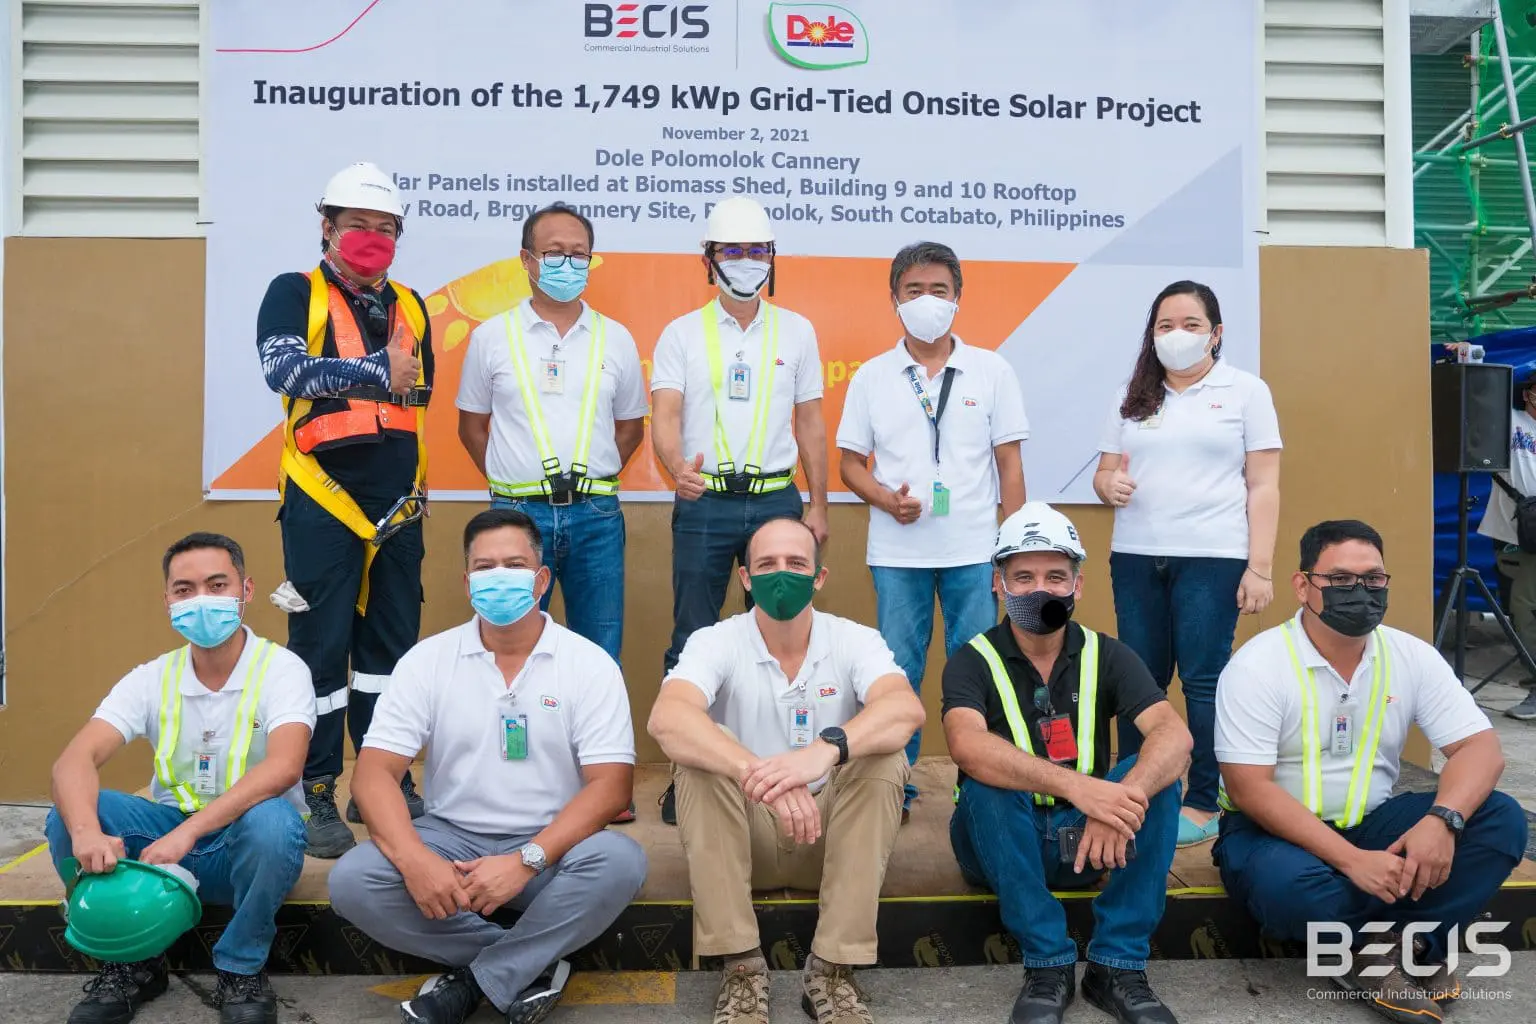 BECIS and Dole Philippines Solar Project Inauguration